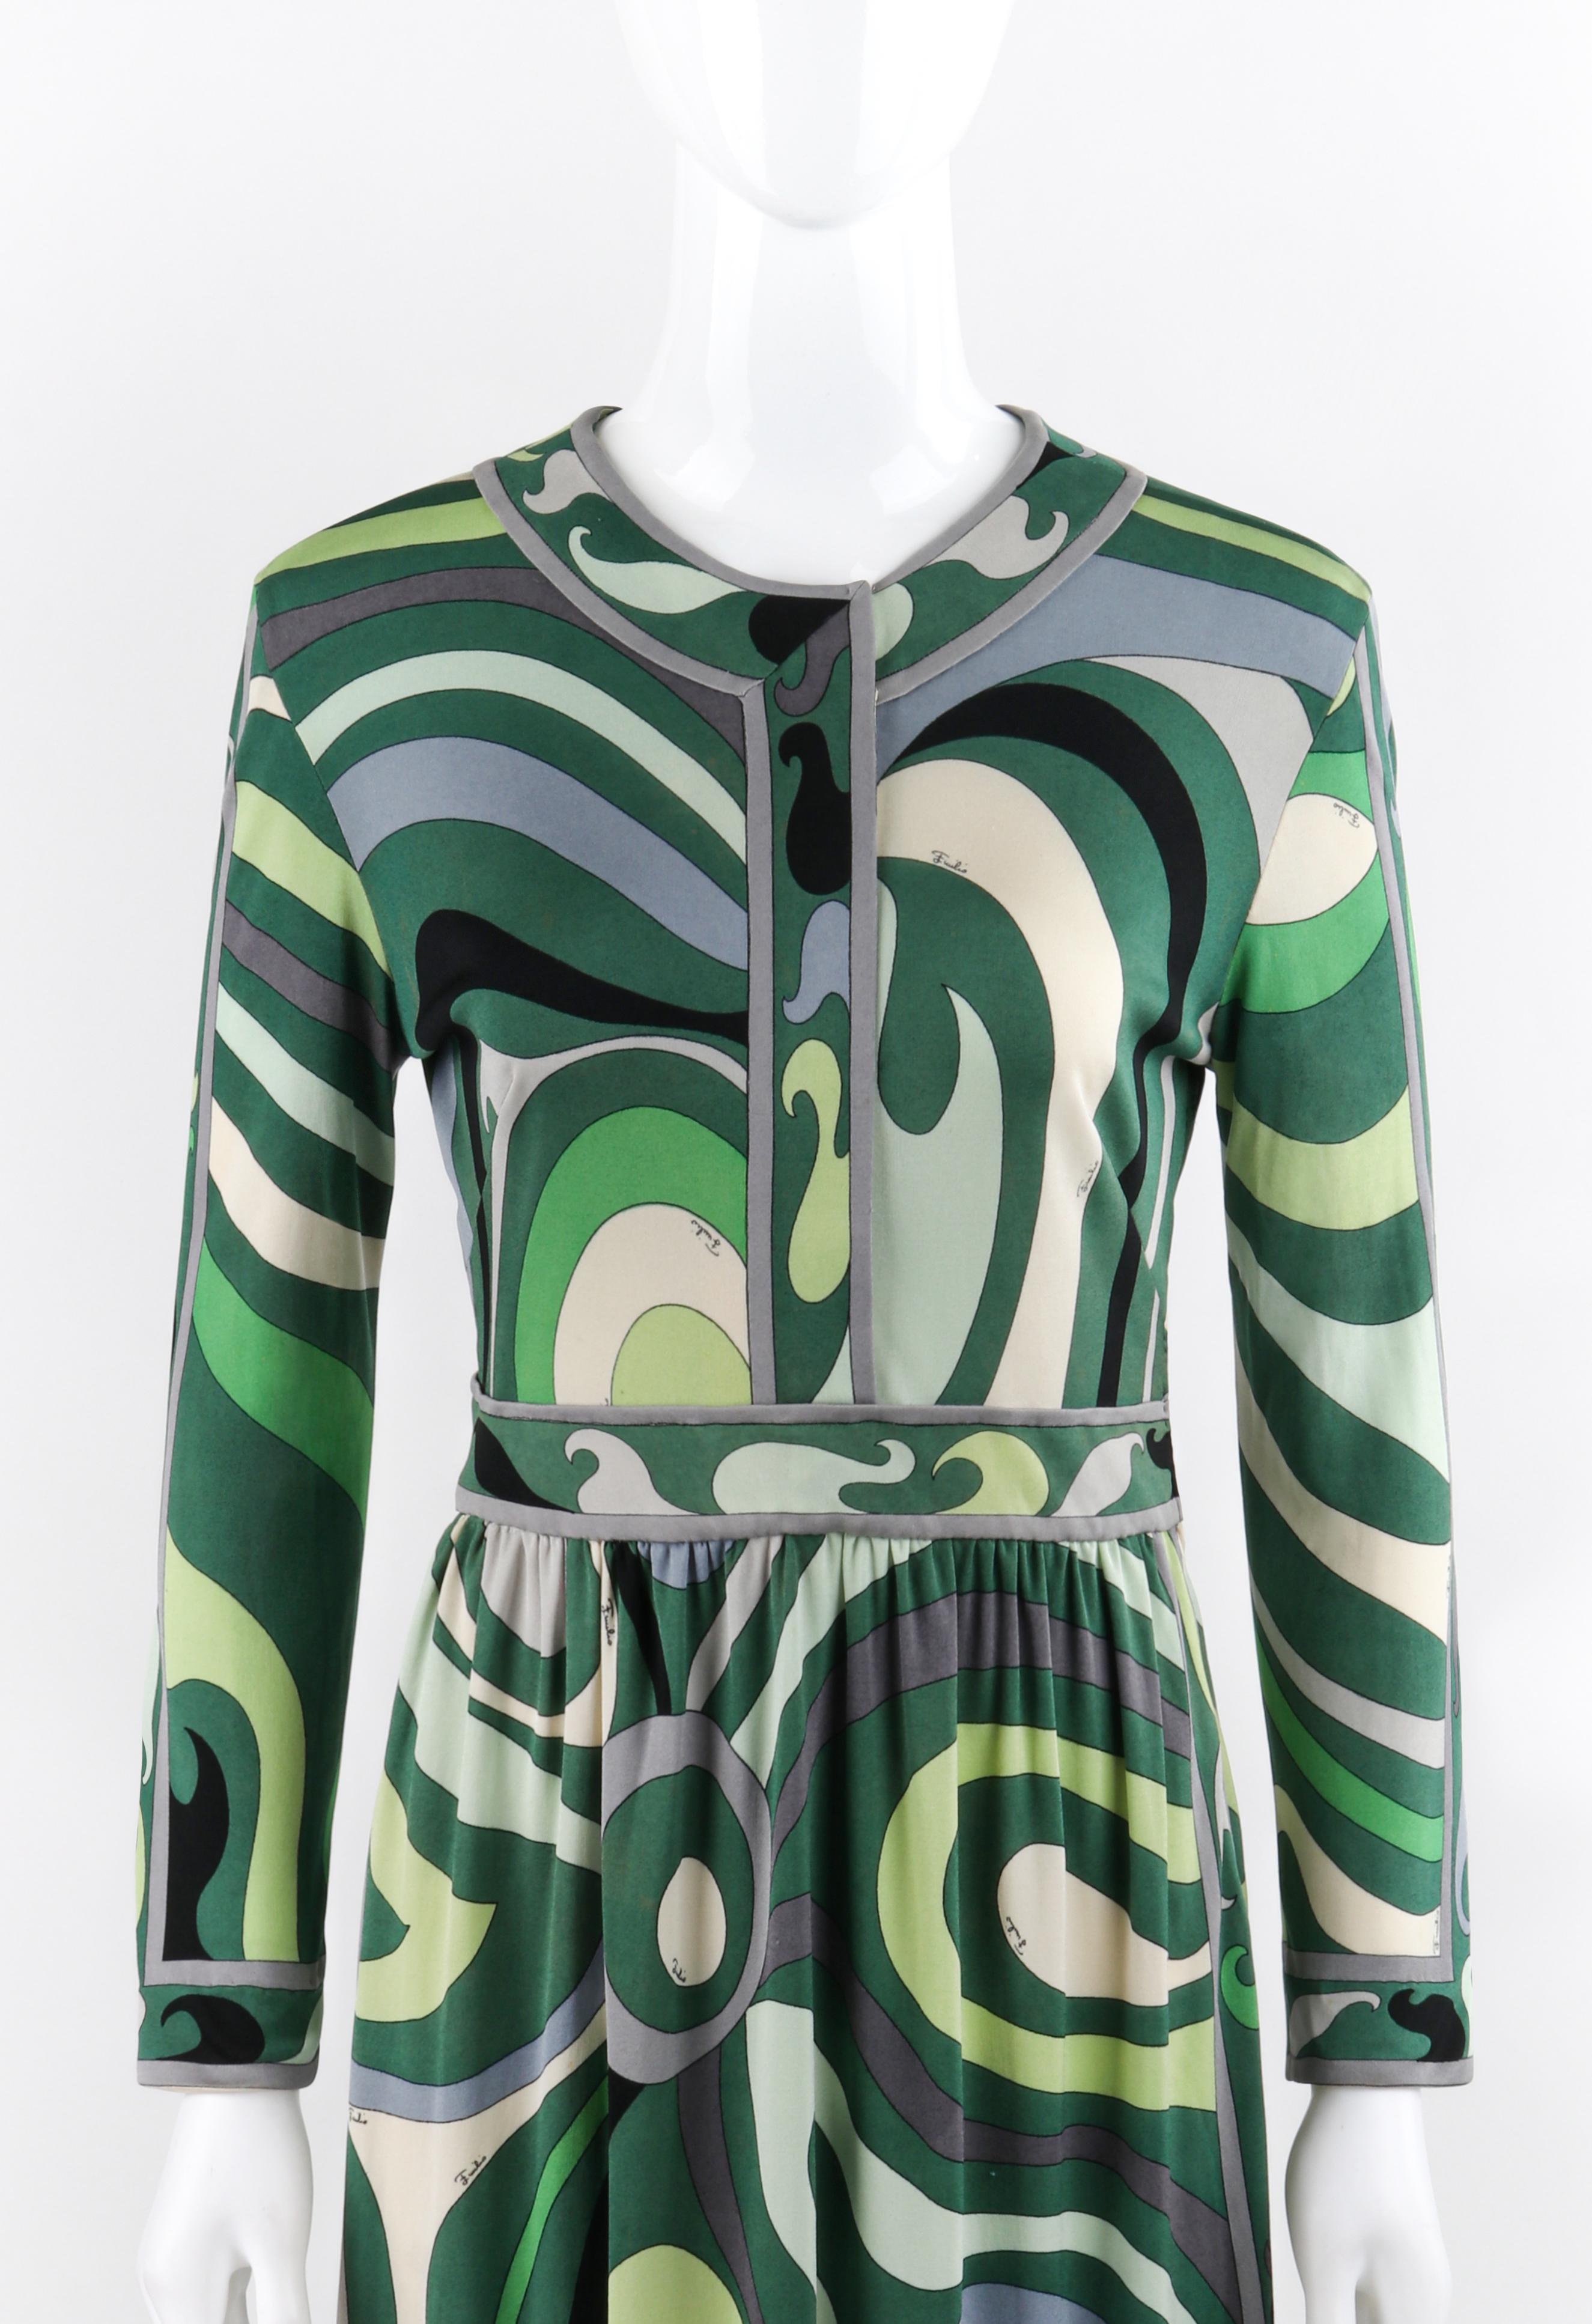 EMILIO PUCCI c.1960’s Green Signature Op Art Long Sleeve Silk Jersey Shift Dress

Circa: 1960’s
Label(s): Emilio Pucci; Made in Italy for Lord & Taylor
Designer: Emilio Pucci
Style: Shift dress
Color(s): Shades of green, gray, white, black, and